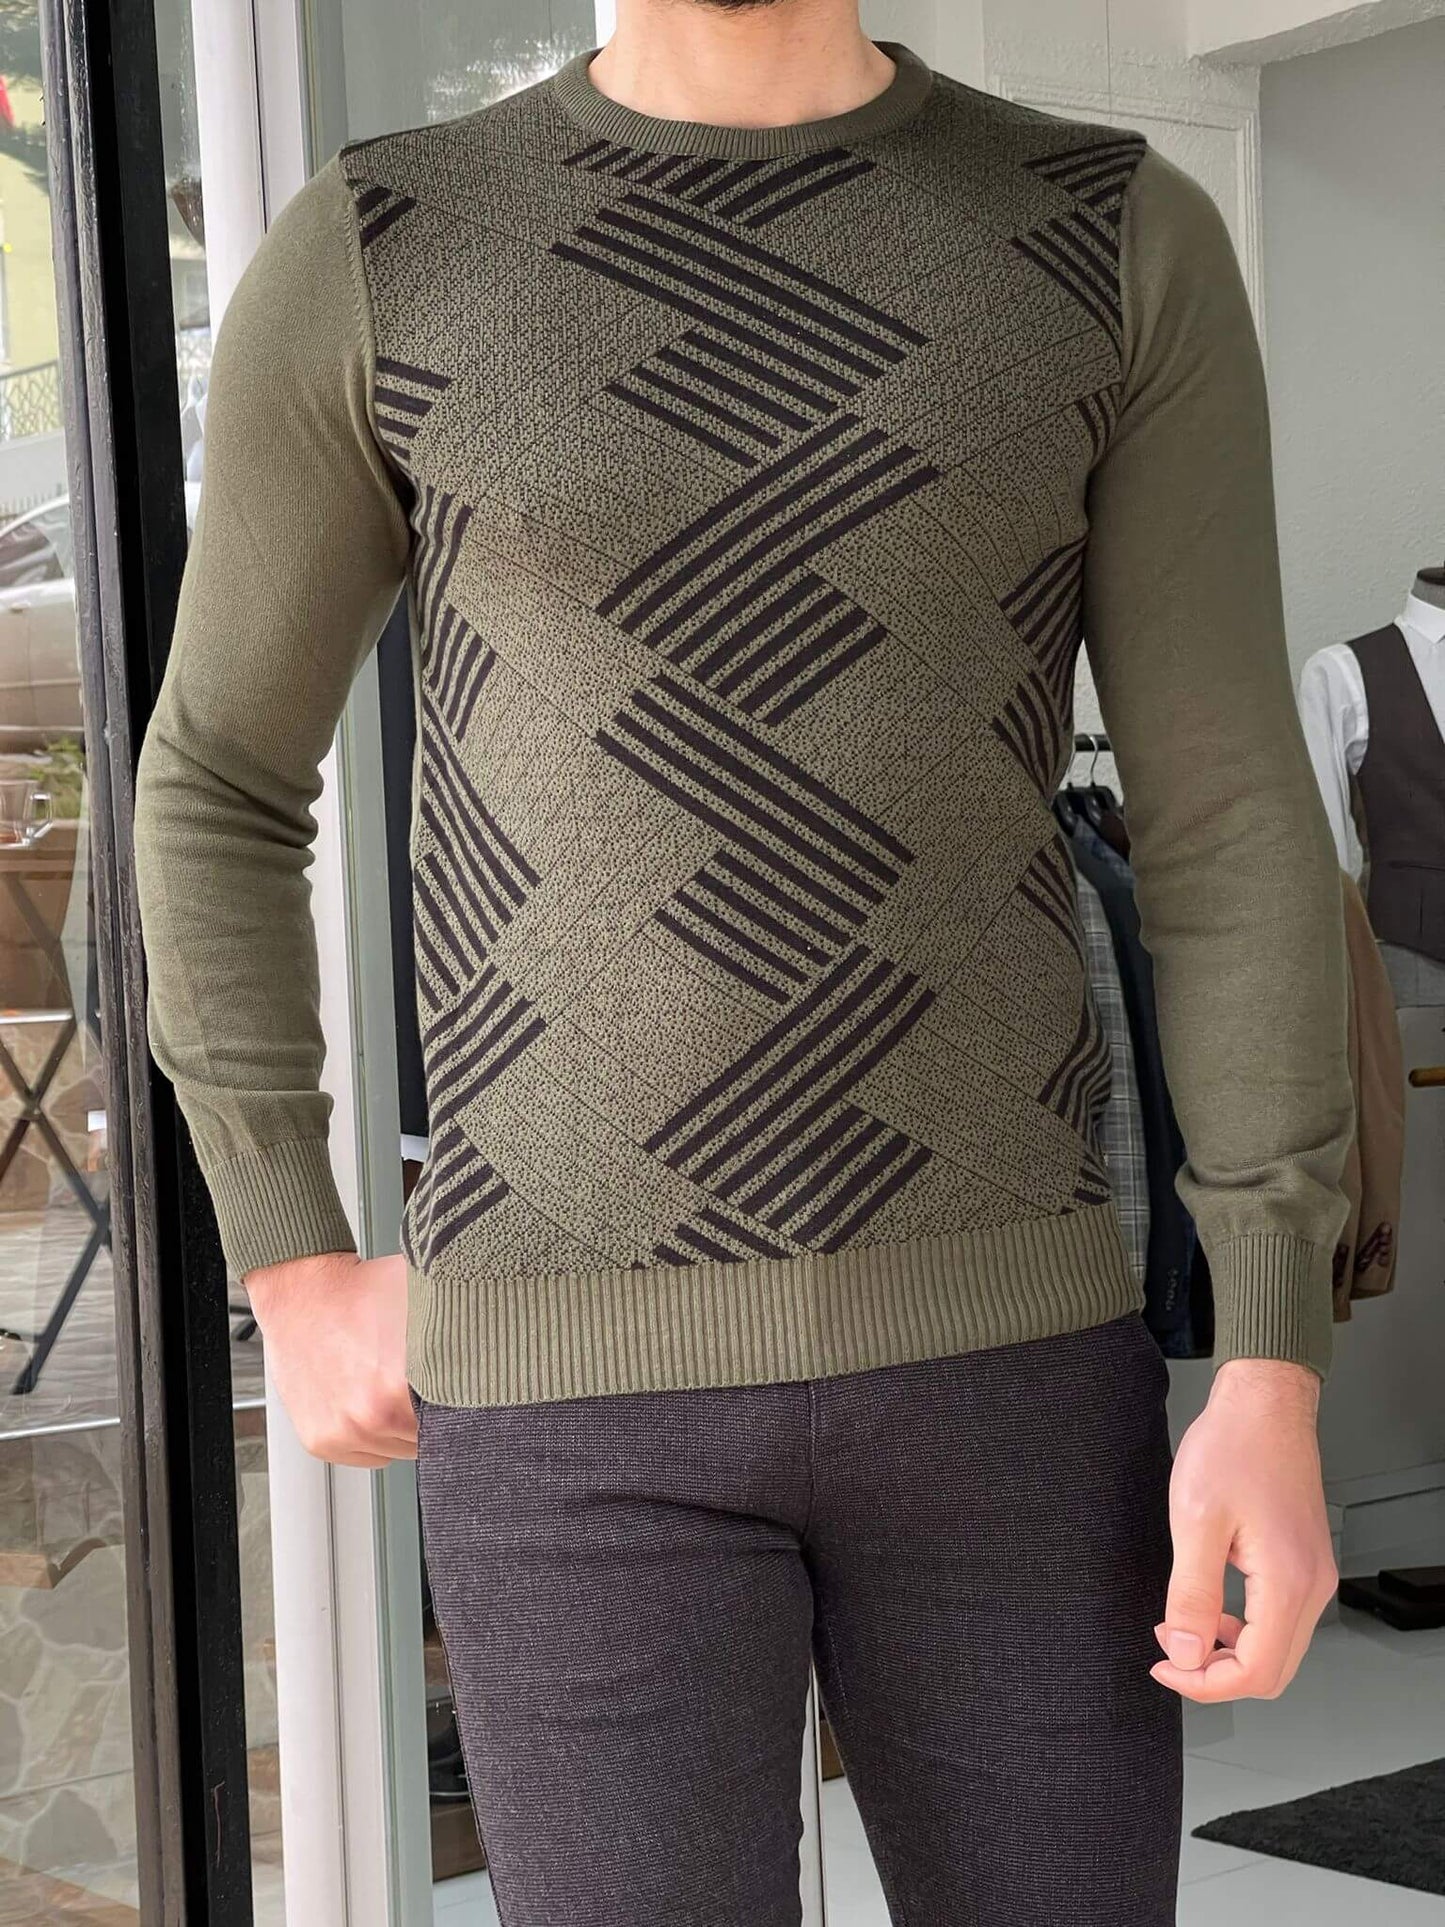 A patterned khaki crewneck sweater. The sweater features a crew neckline and a khaki-colored background with intricate patterns